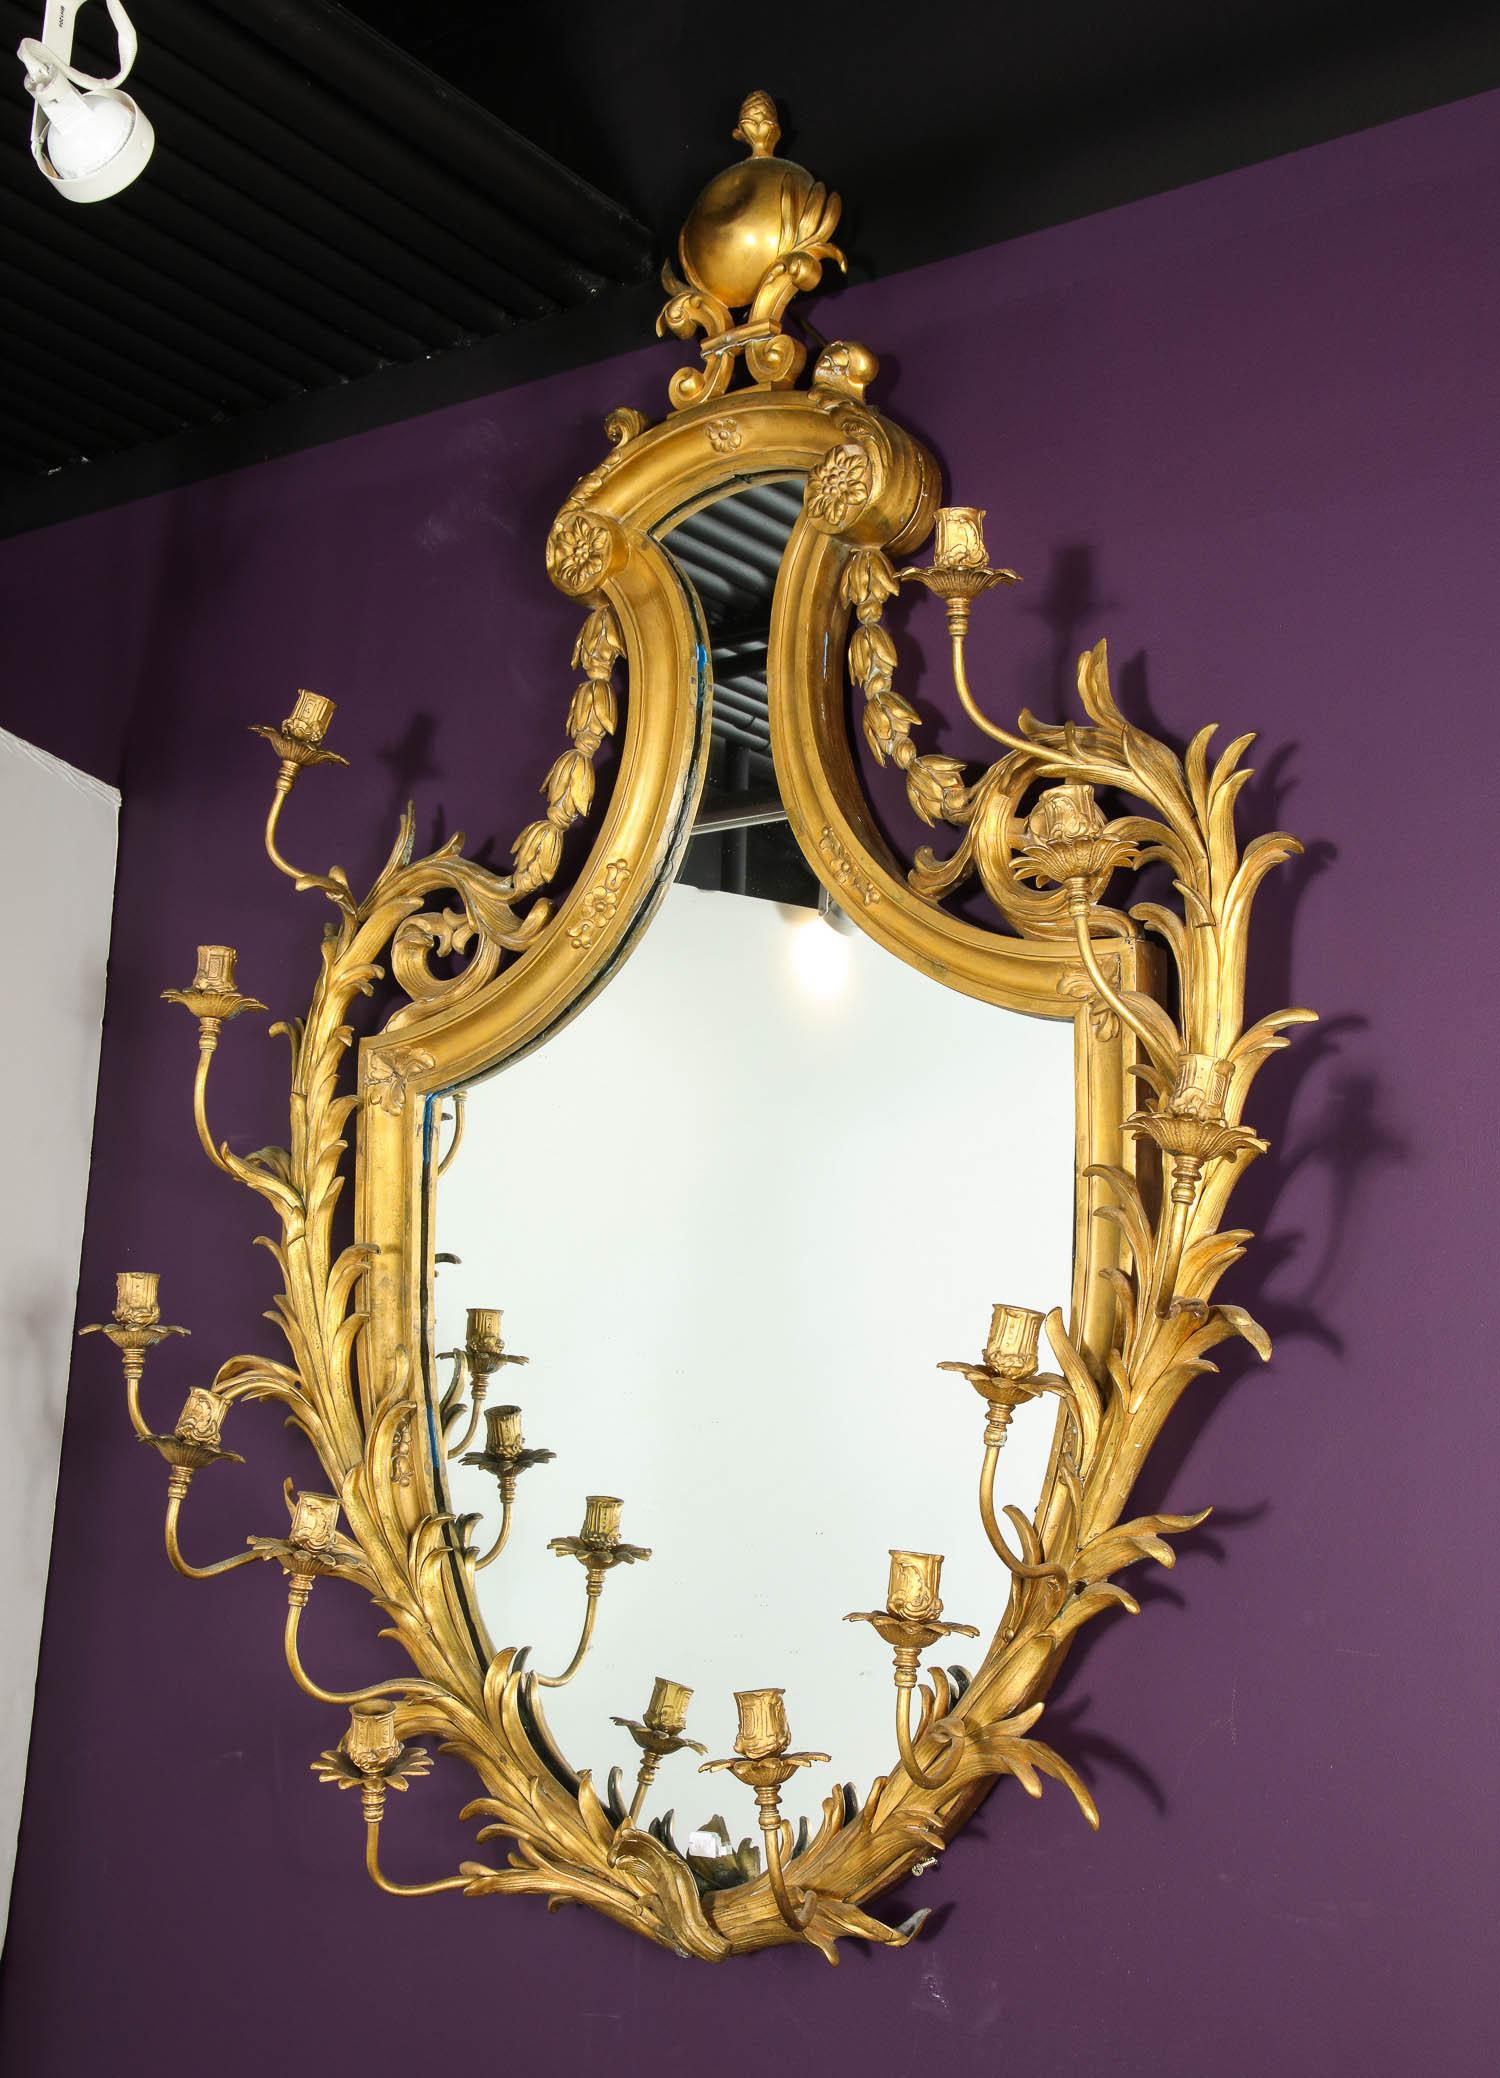 Very Fine Gilt-Bronze Ormolu Girandole Mirror by Edward F. Caldwell & Co.

Very good quality. Solid bronze, with beveled mirror and candleholders

Measure: 56